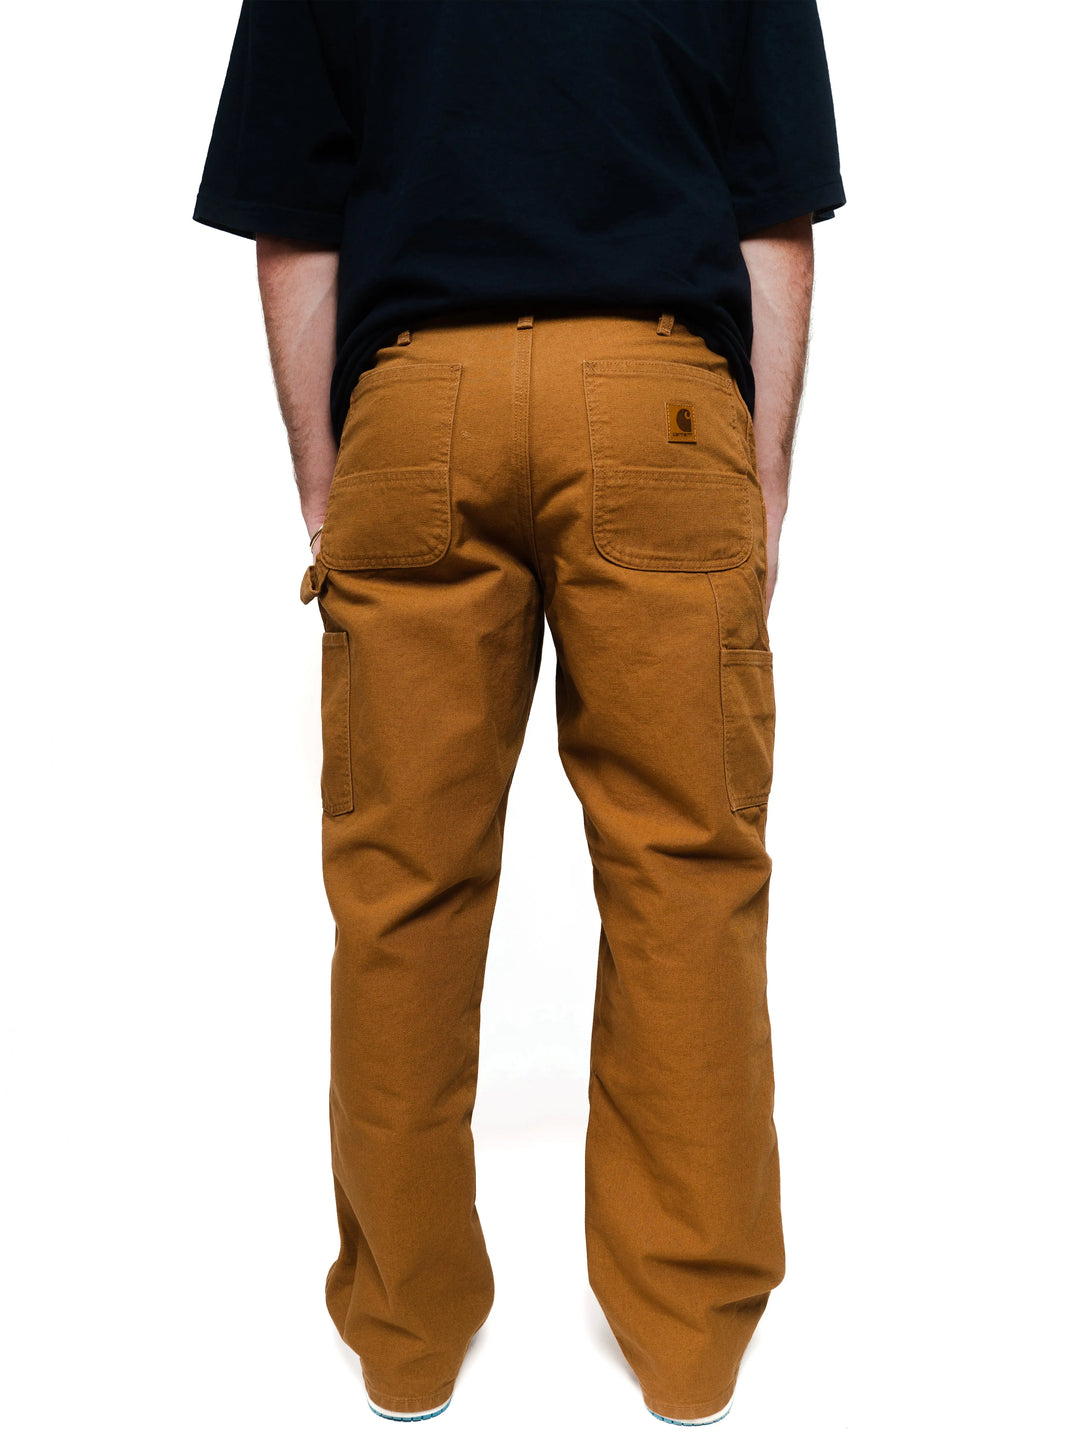 Carhartt Washed Loose Fit Pant Carhartt Brown Prior